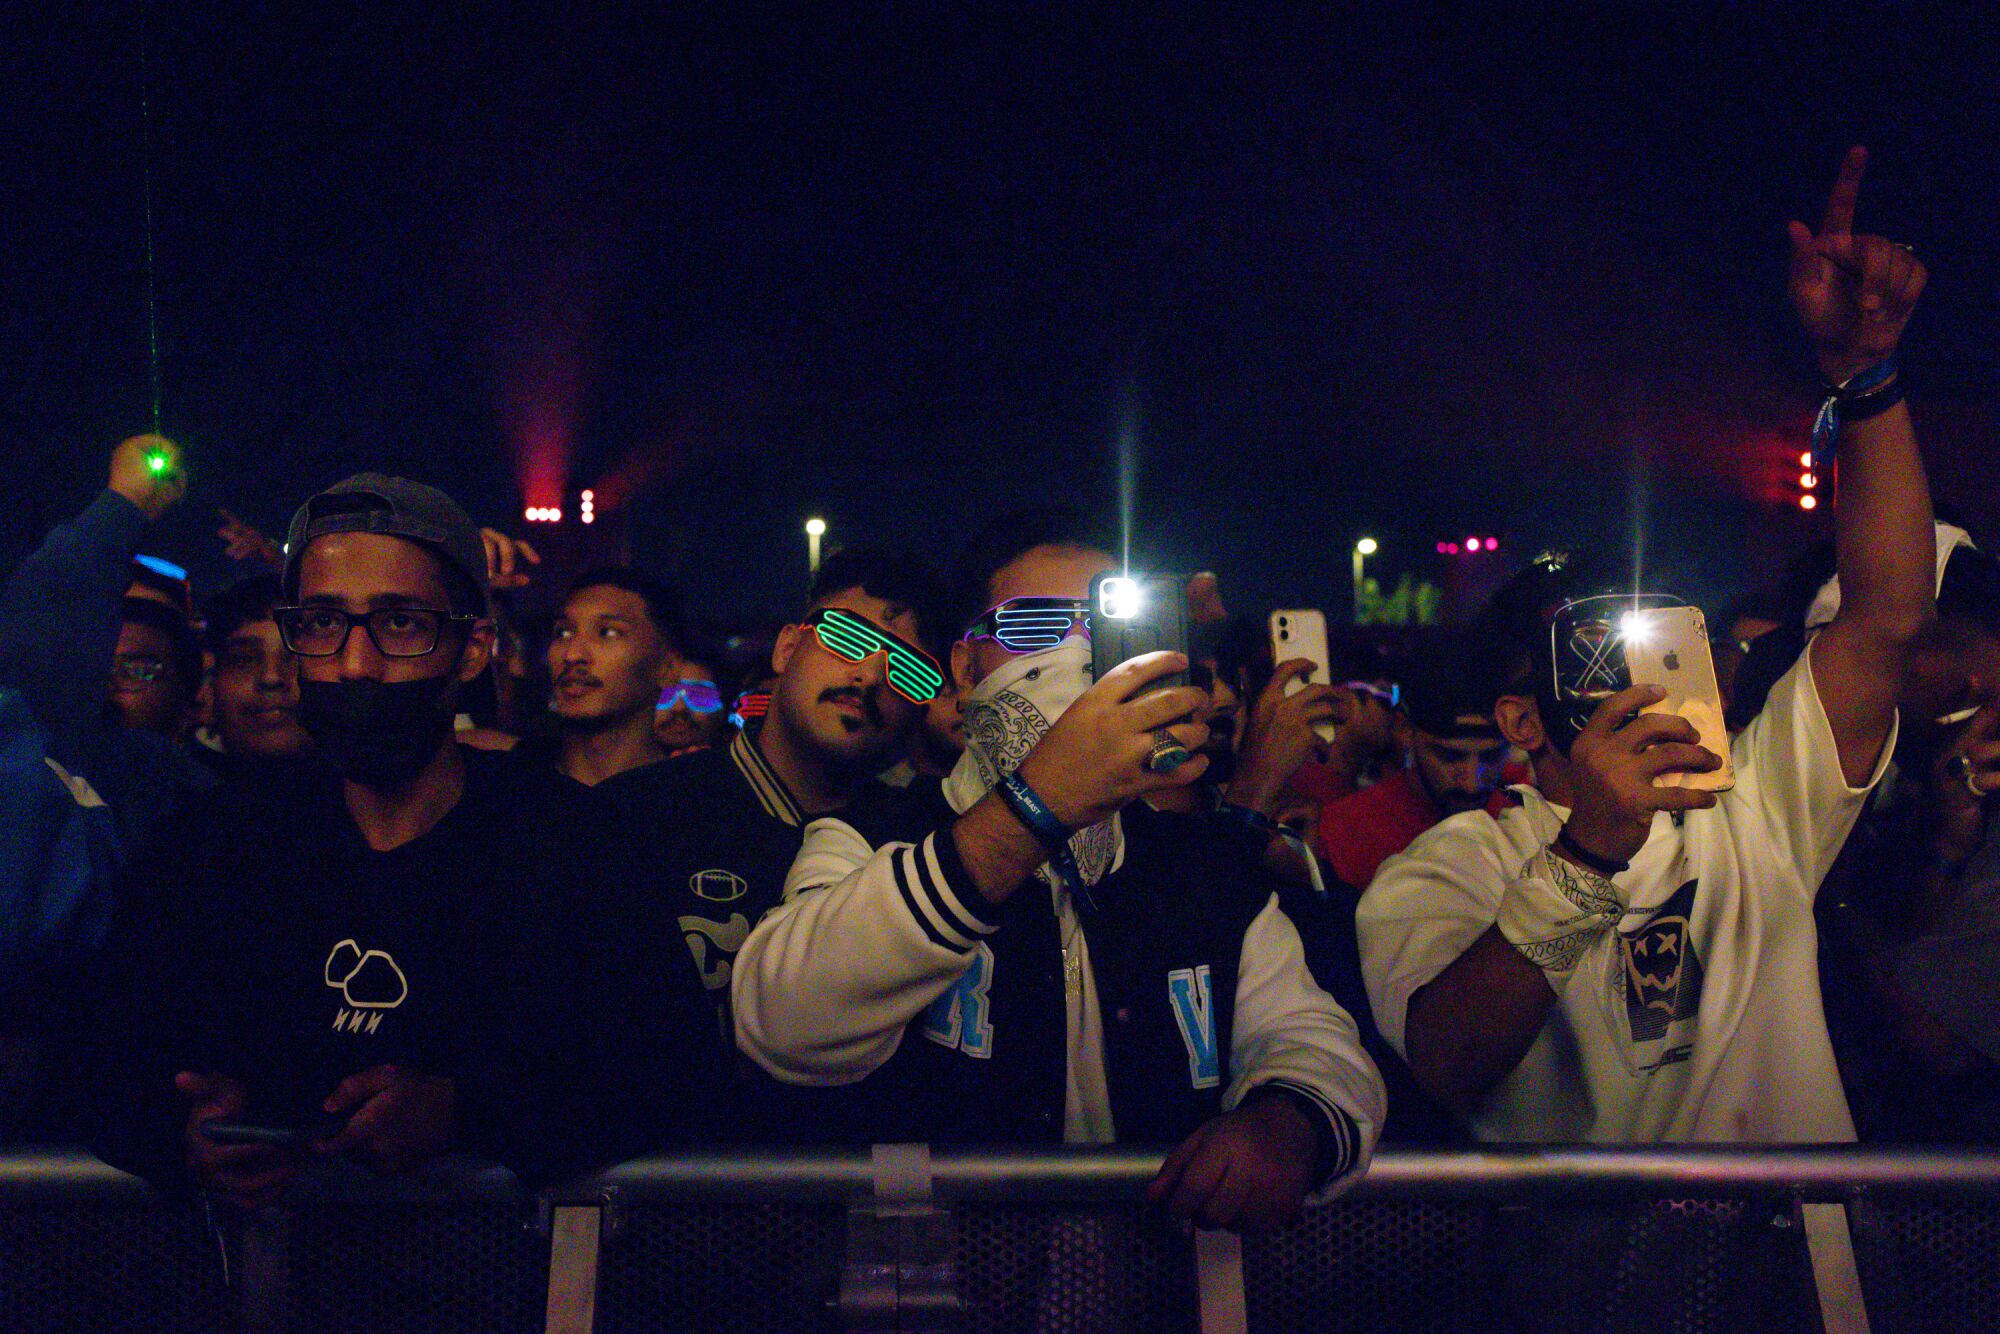 Concertgoers at a music festival hold up cellphones and wear glow in the dark glasses.